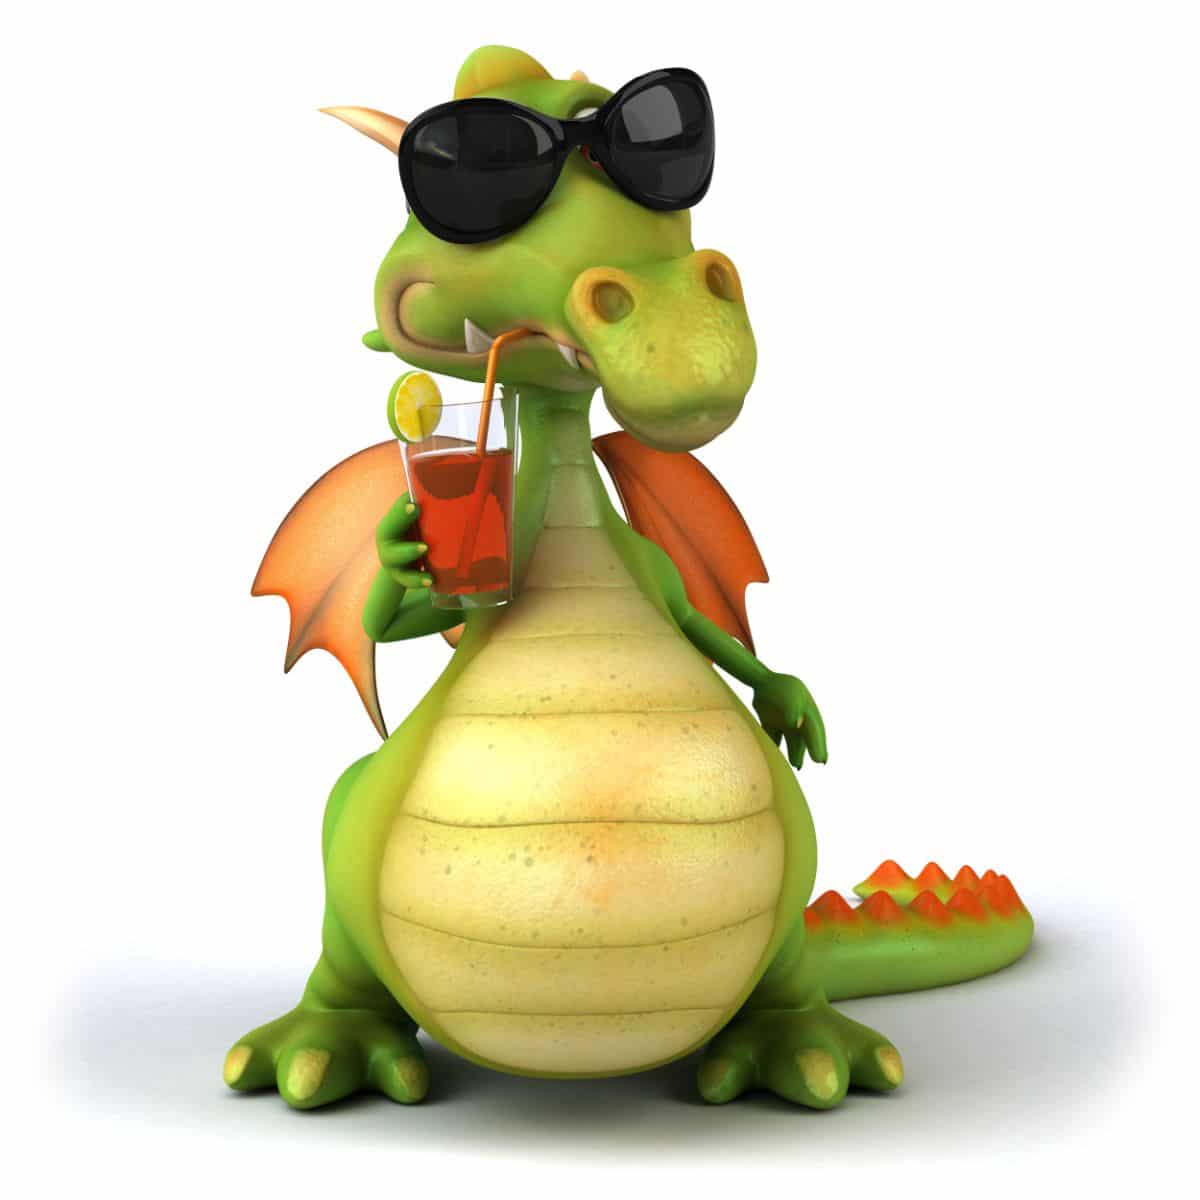 a cartoon dragon wearing shades sips from a glass containing red liquid, a lime garnish and a straw